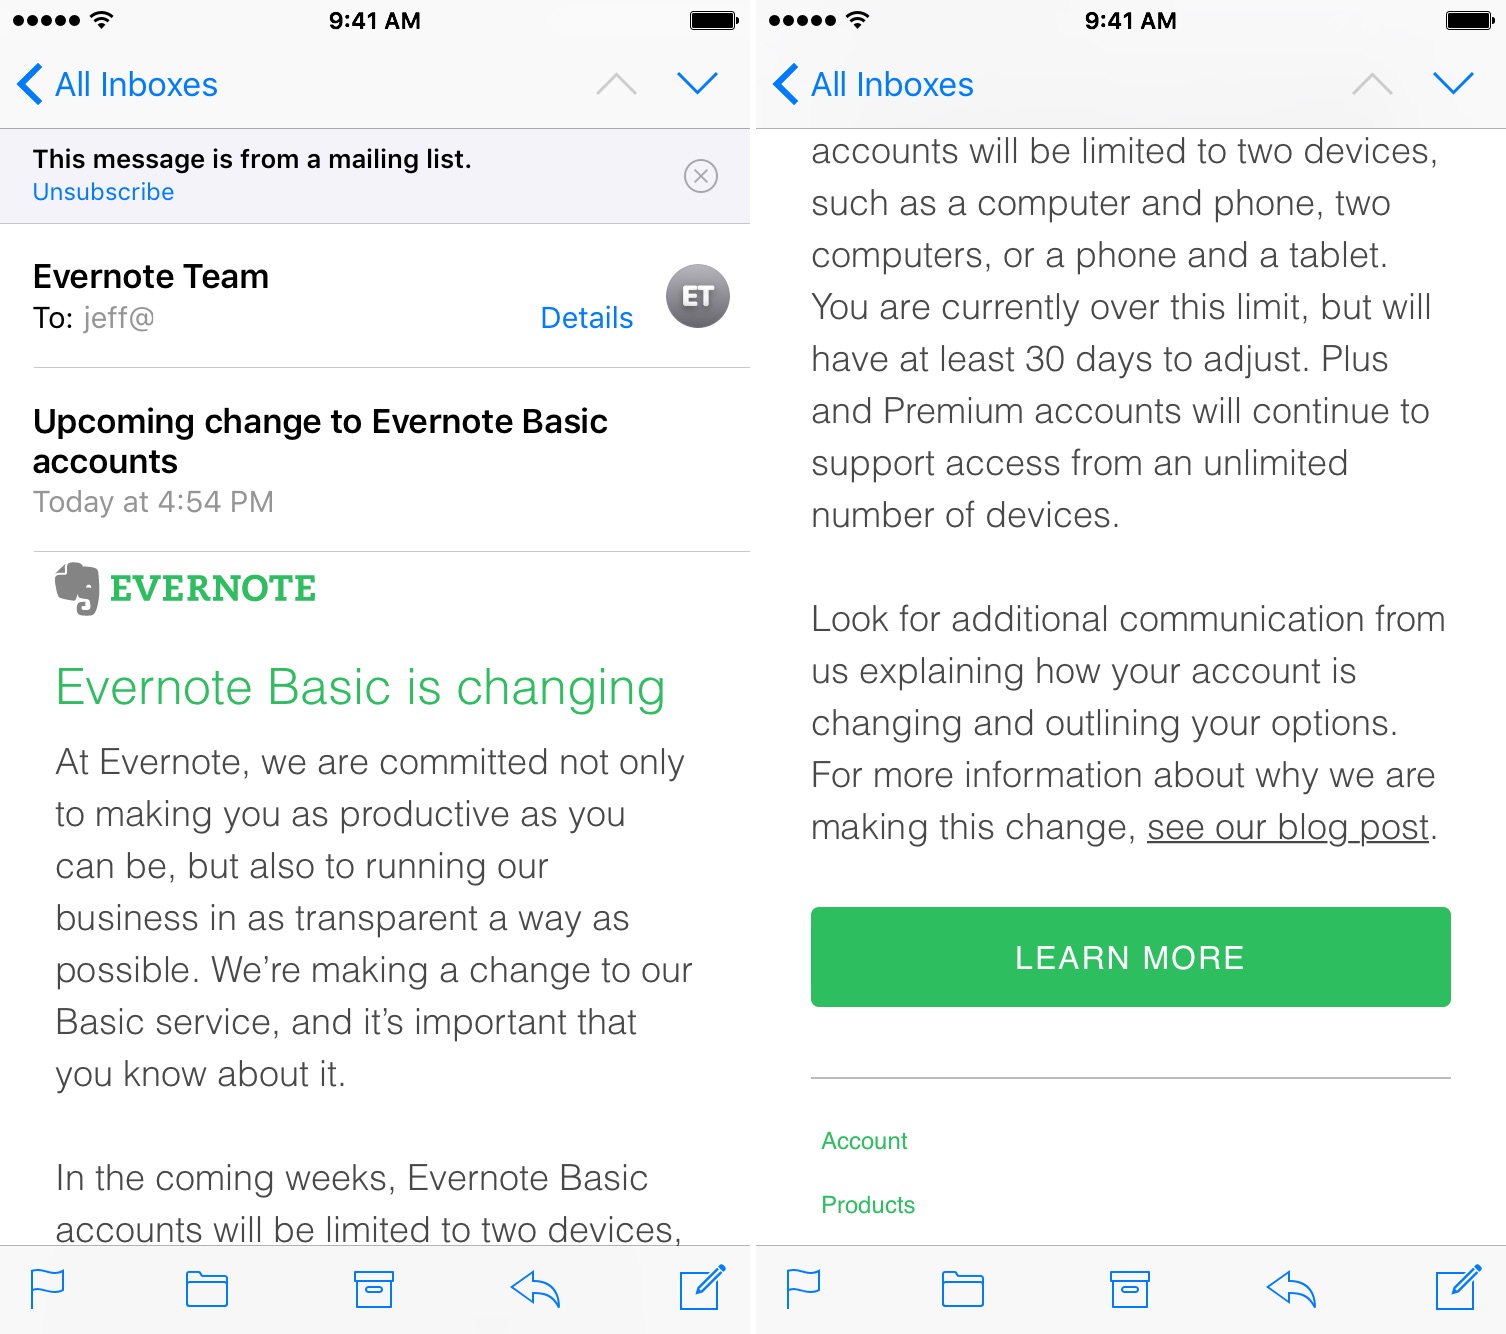 Evernote email